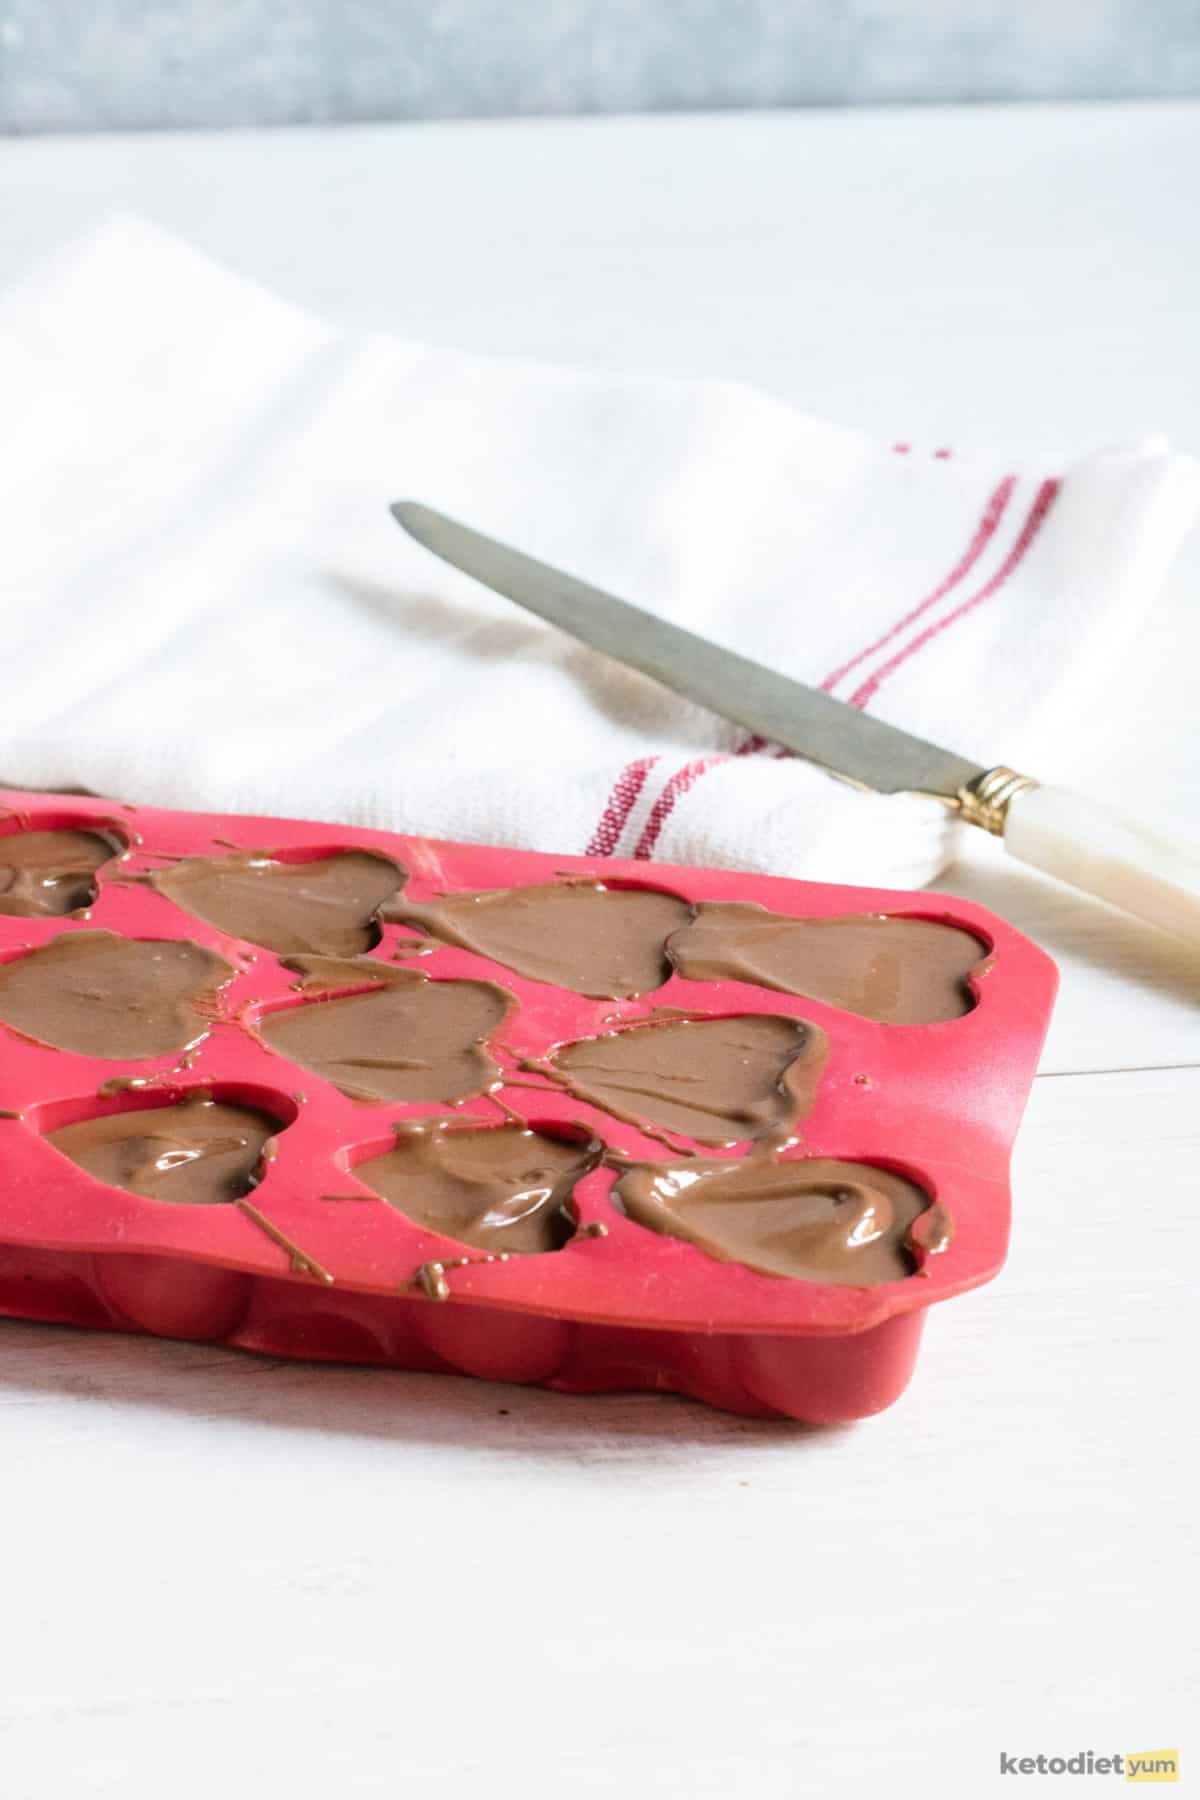 Pouring the remaining chocolate mixture into the heart-shaped silicone mold